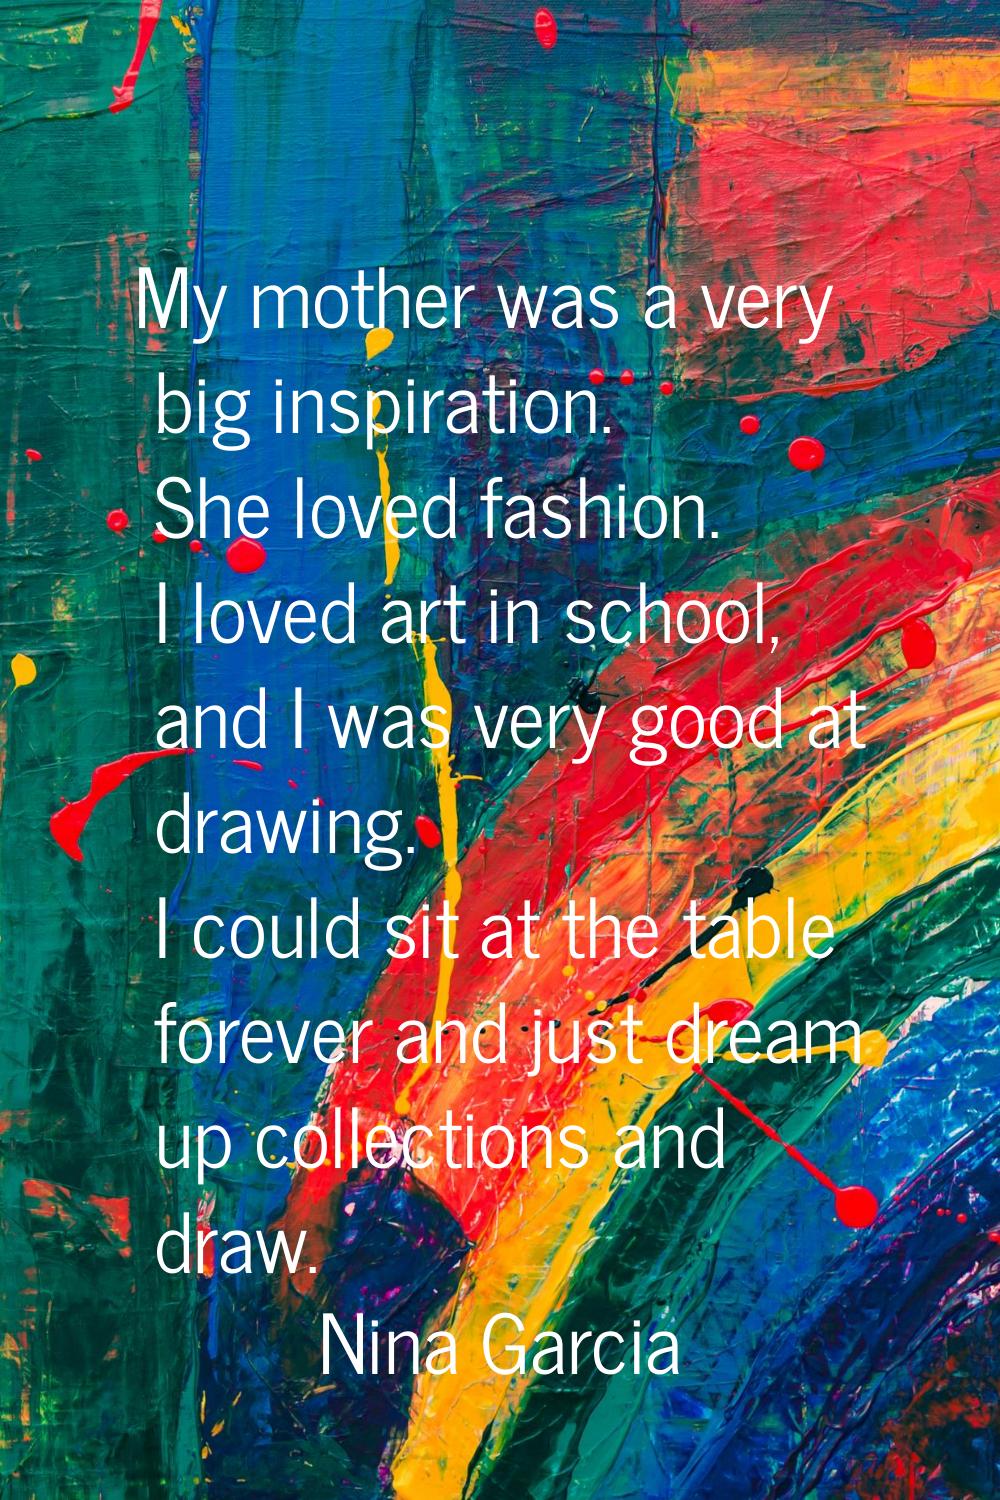 My mother was a very big inspiration. She loved fashion. I loved art in school, and I was very good